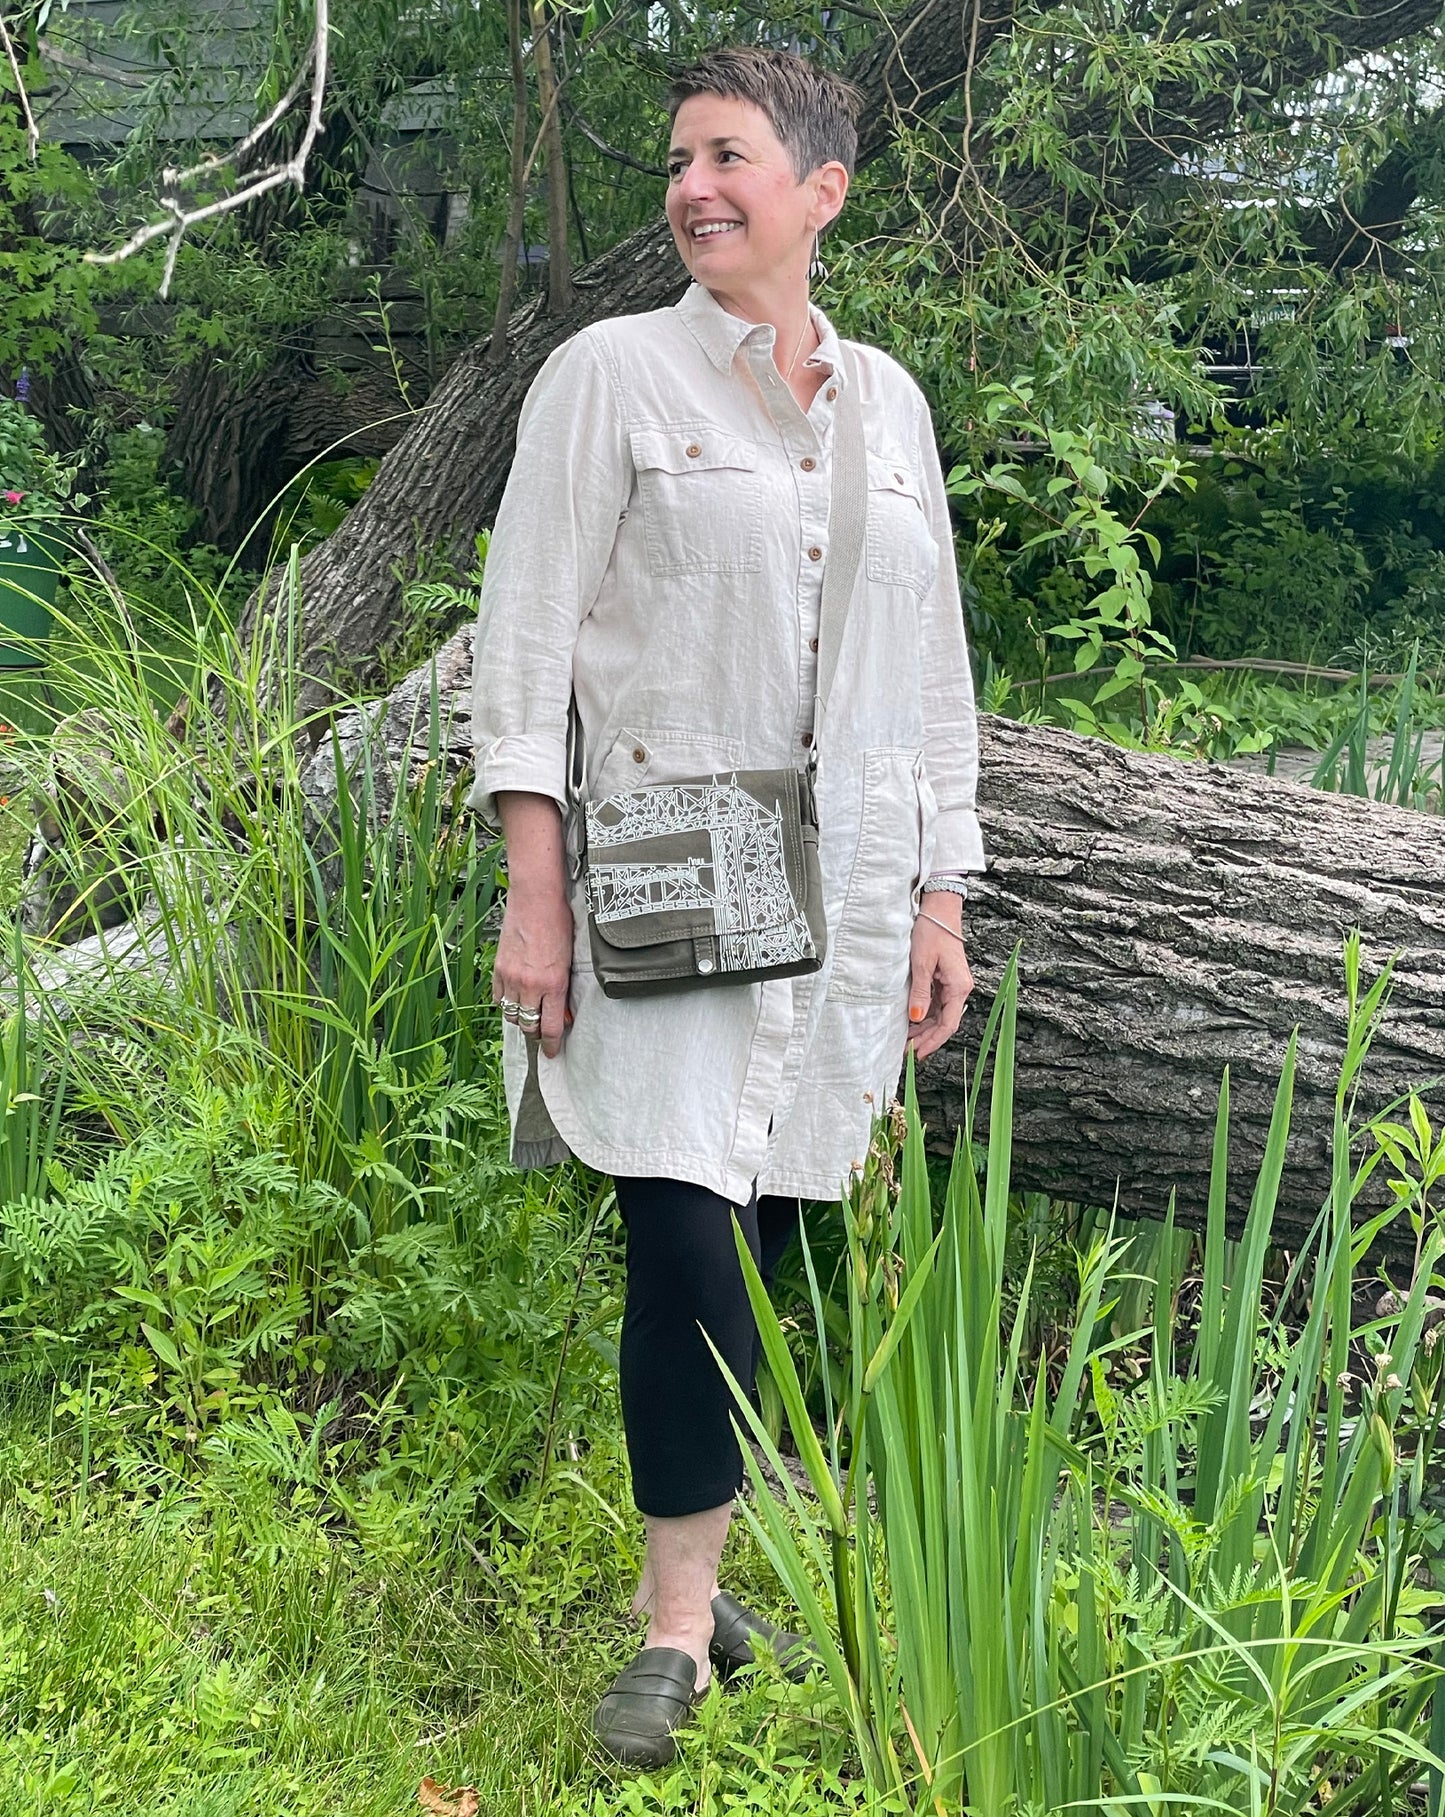 Dock 5’s hand-crafted Aerial Lift Bridge Canvas Messenger Bag in olive is being worn by a smiling woman standing near the shoreline of Park Point